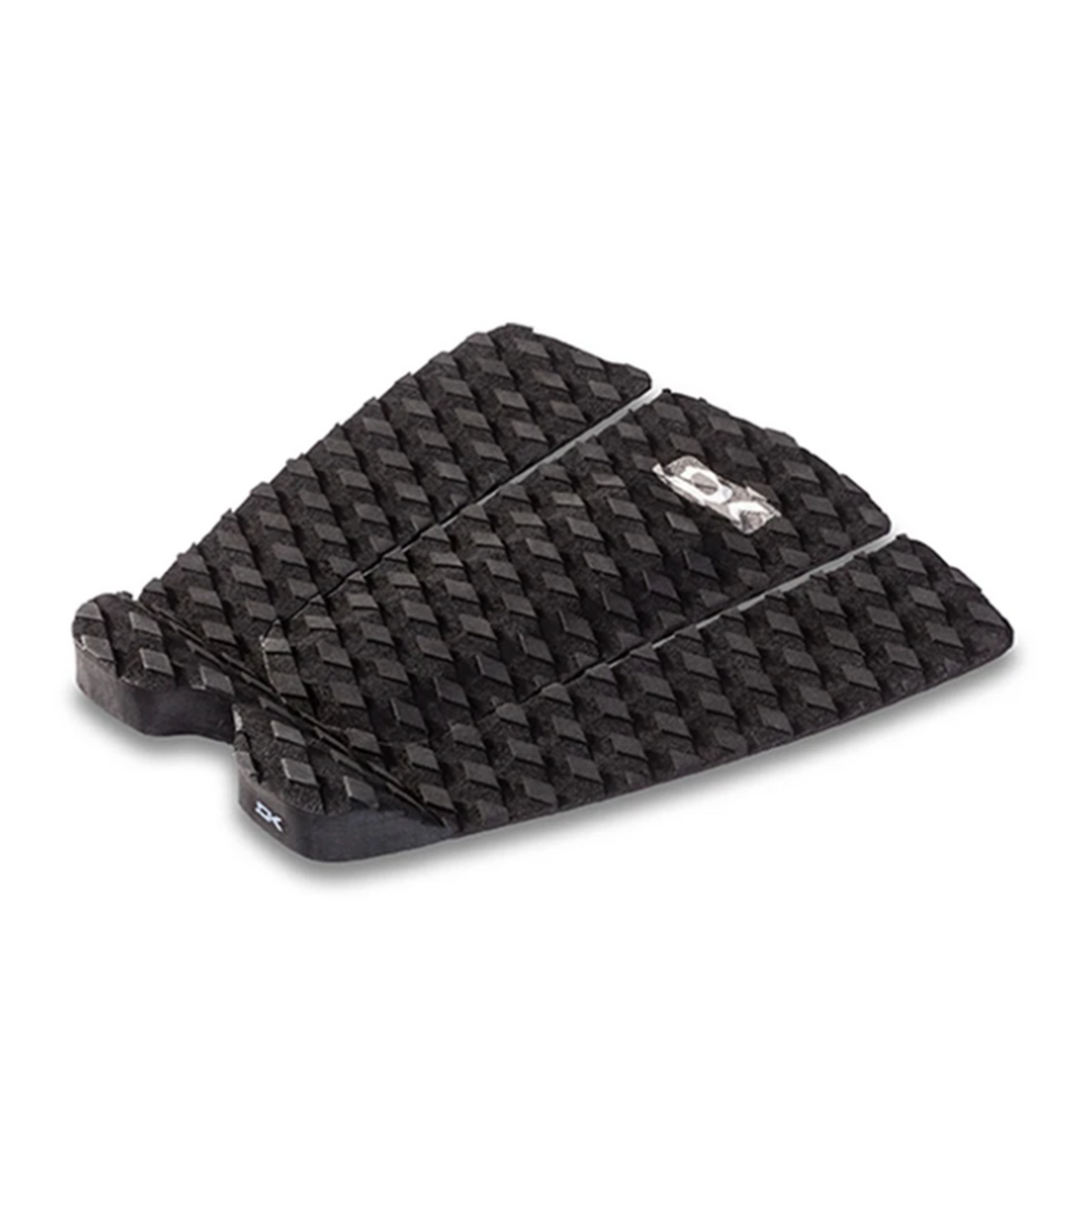 Dakine Andy Irons Pro Traction Pad - Black